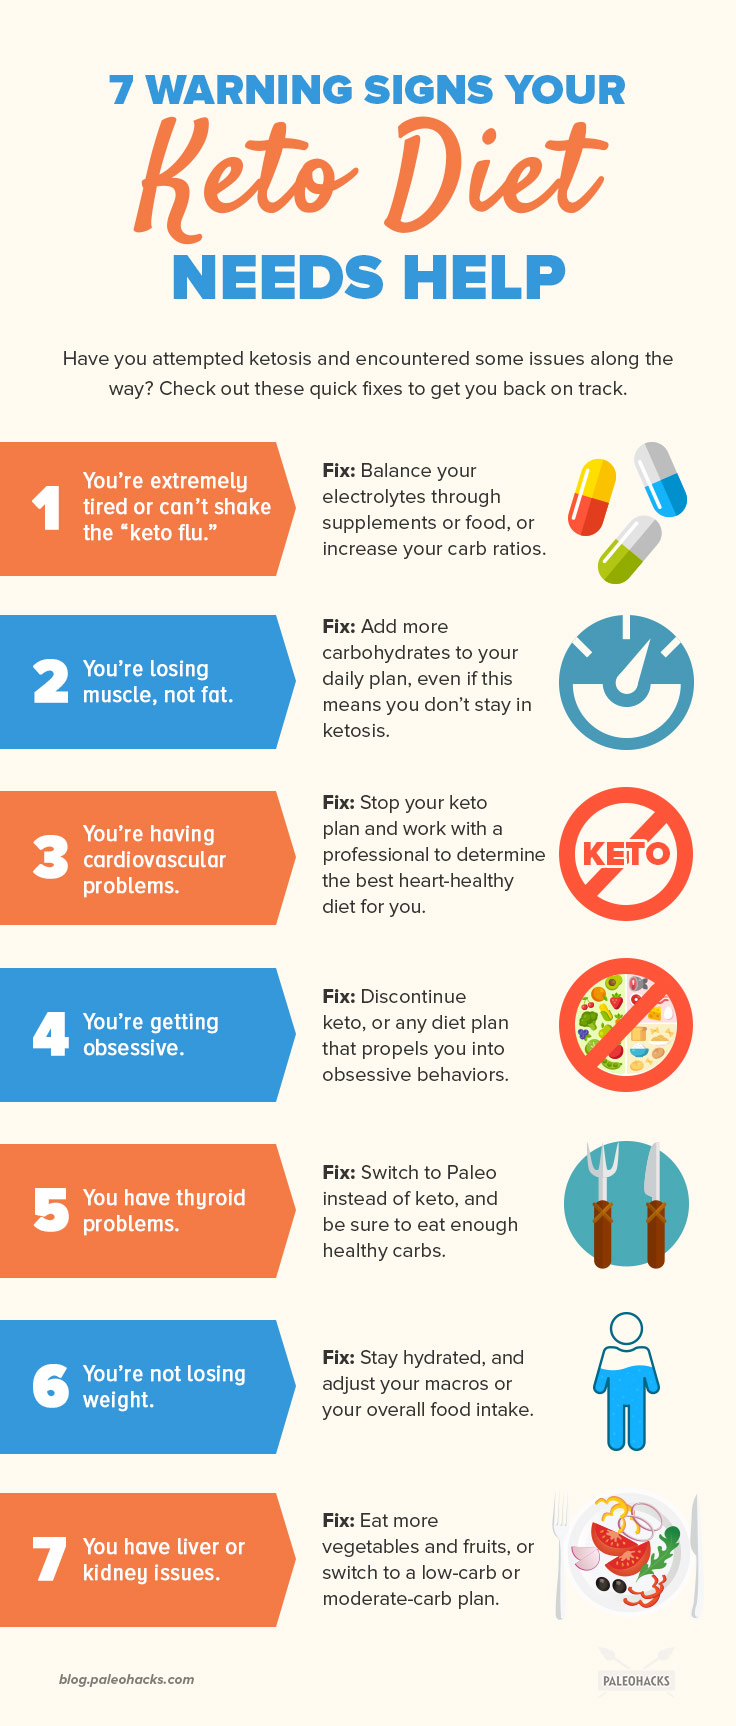 Have you attempted ketosis and encountered some issues along the way? Check out these quick fixes to get you back on track.